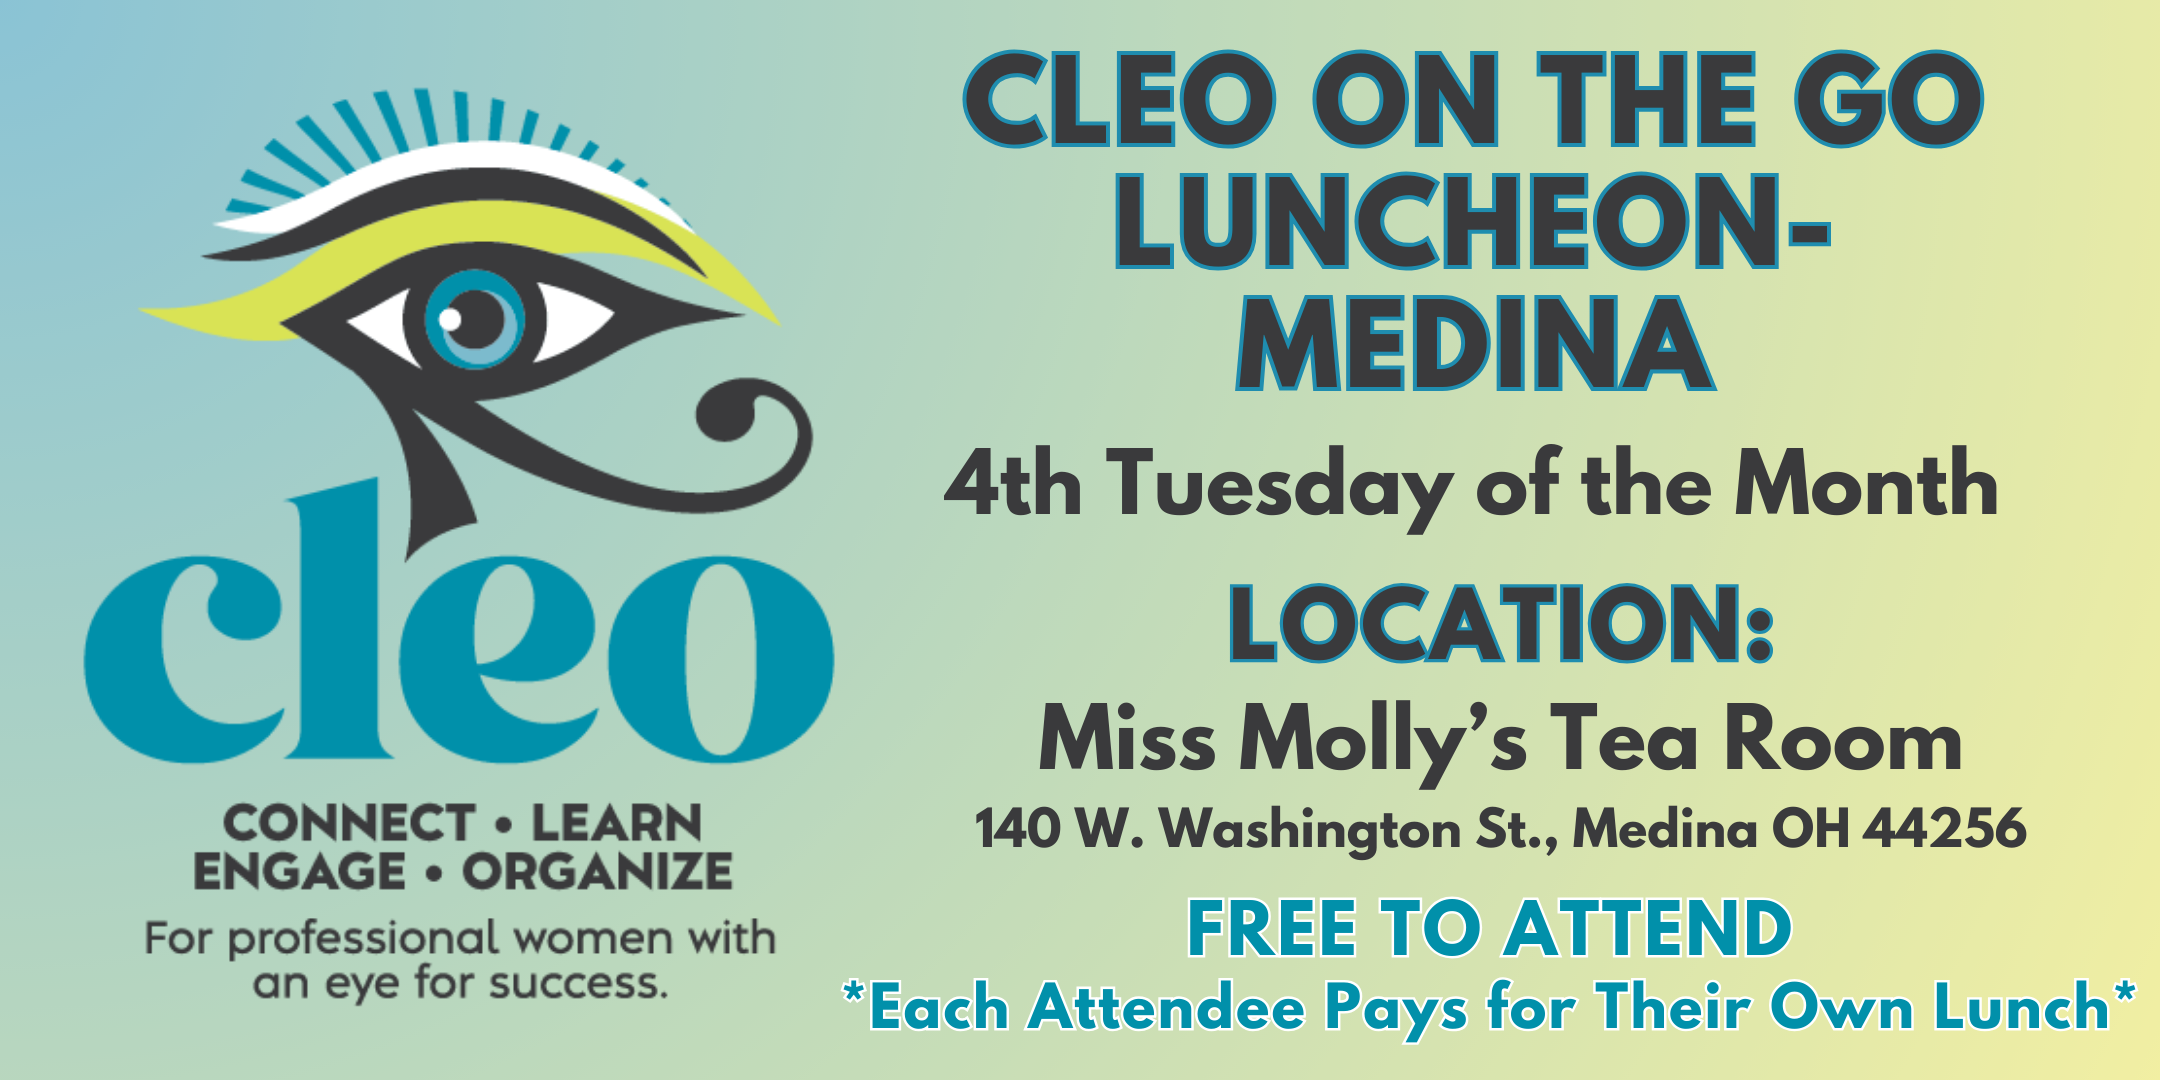 CLEO on the Go Monthly Medina Meeting is at Miss Molly's Tea Room